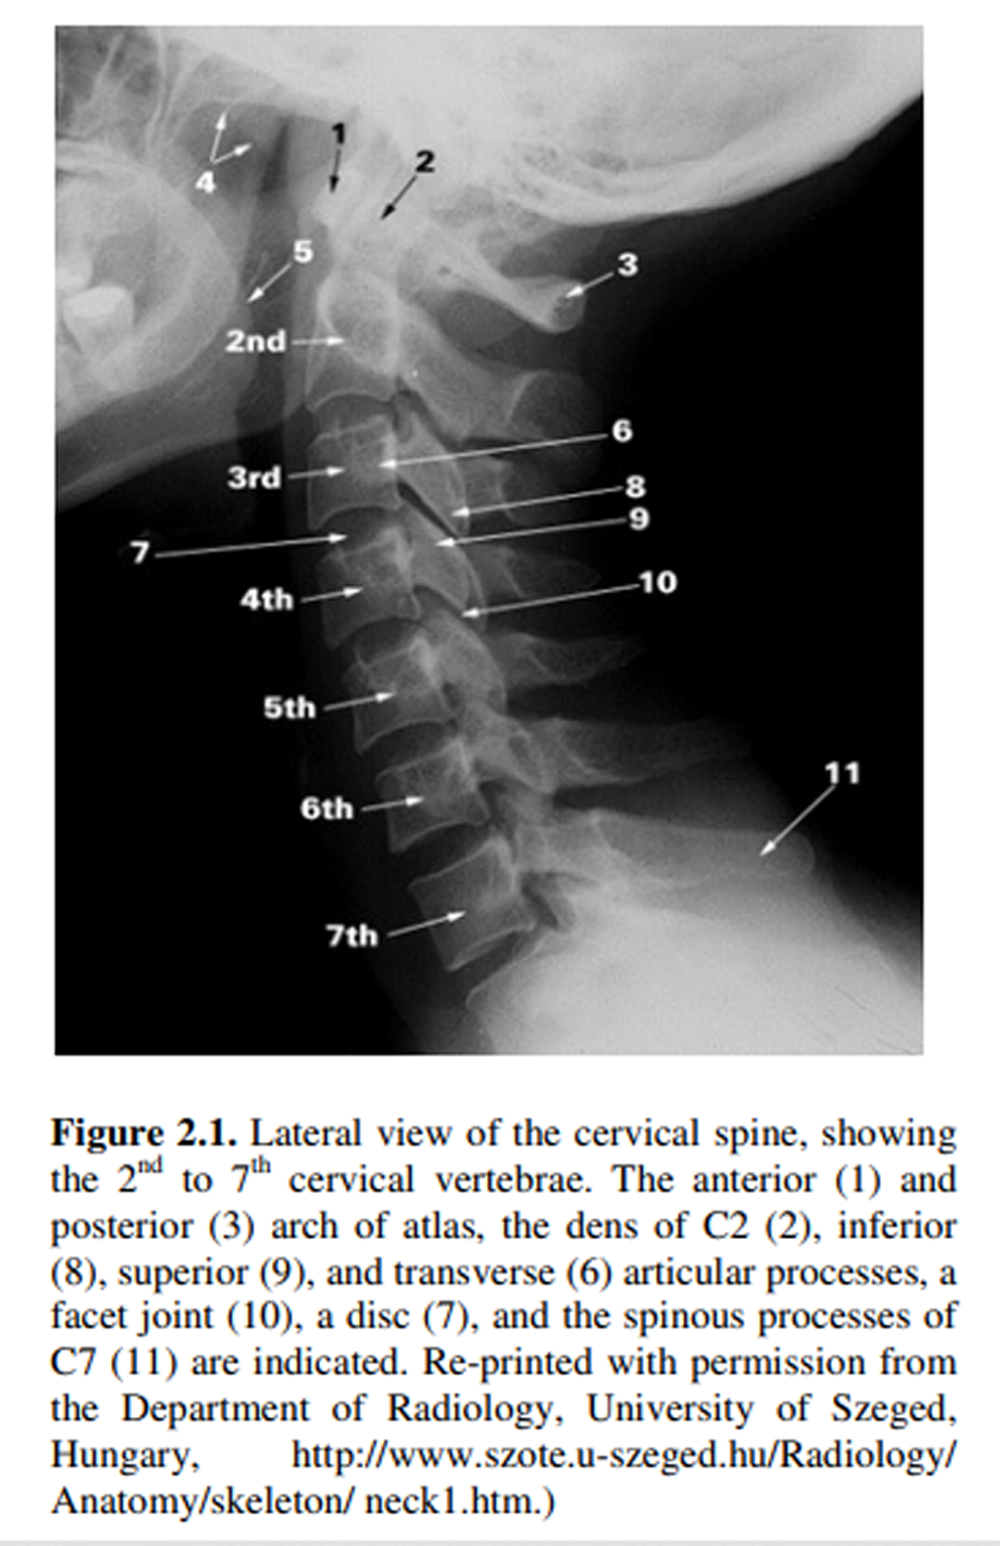 Examining Clinical Opinion and Experience Regarding Utilization of Plain Radiography of the Spine: Evidence from Surveying the Chiropractic Profession